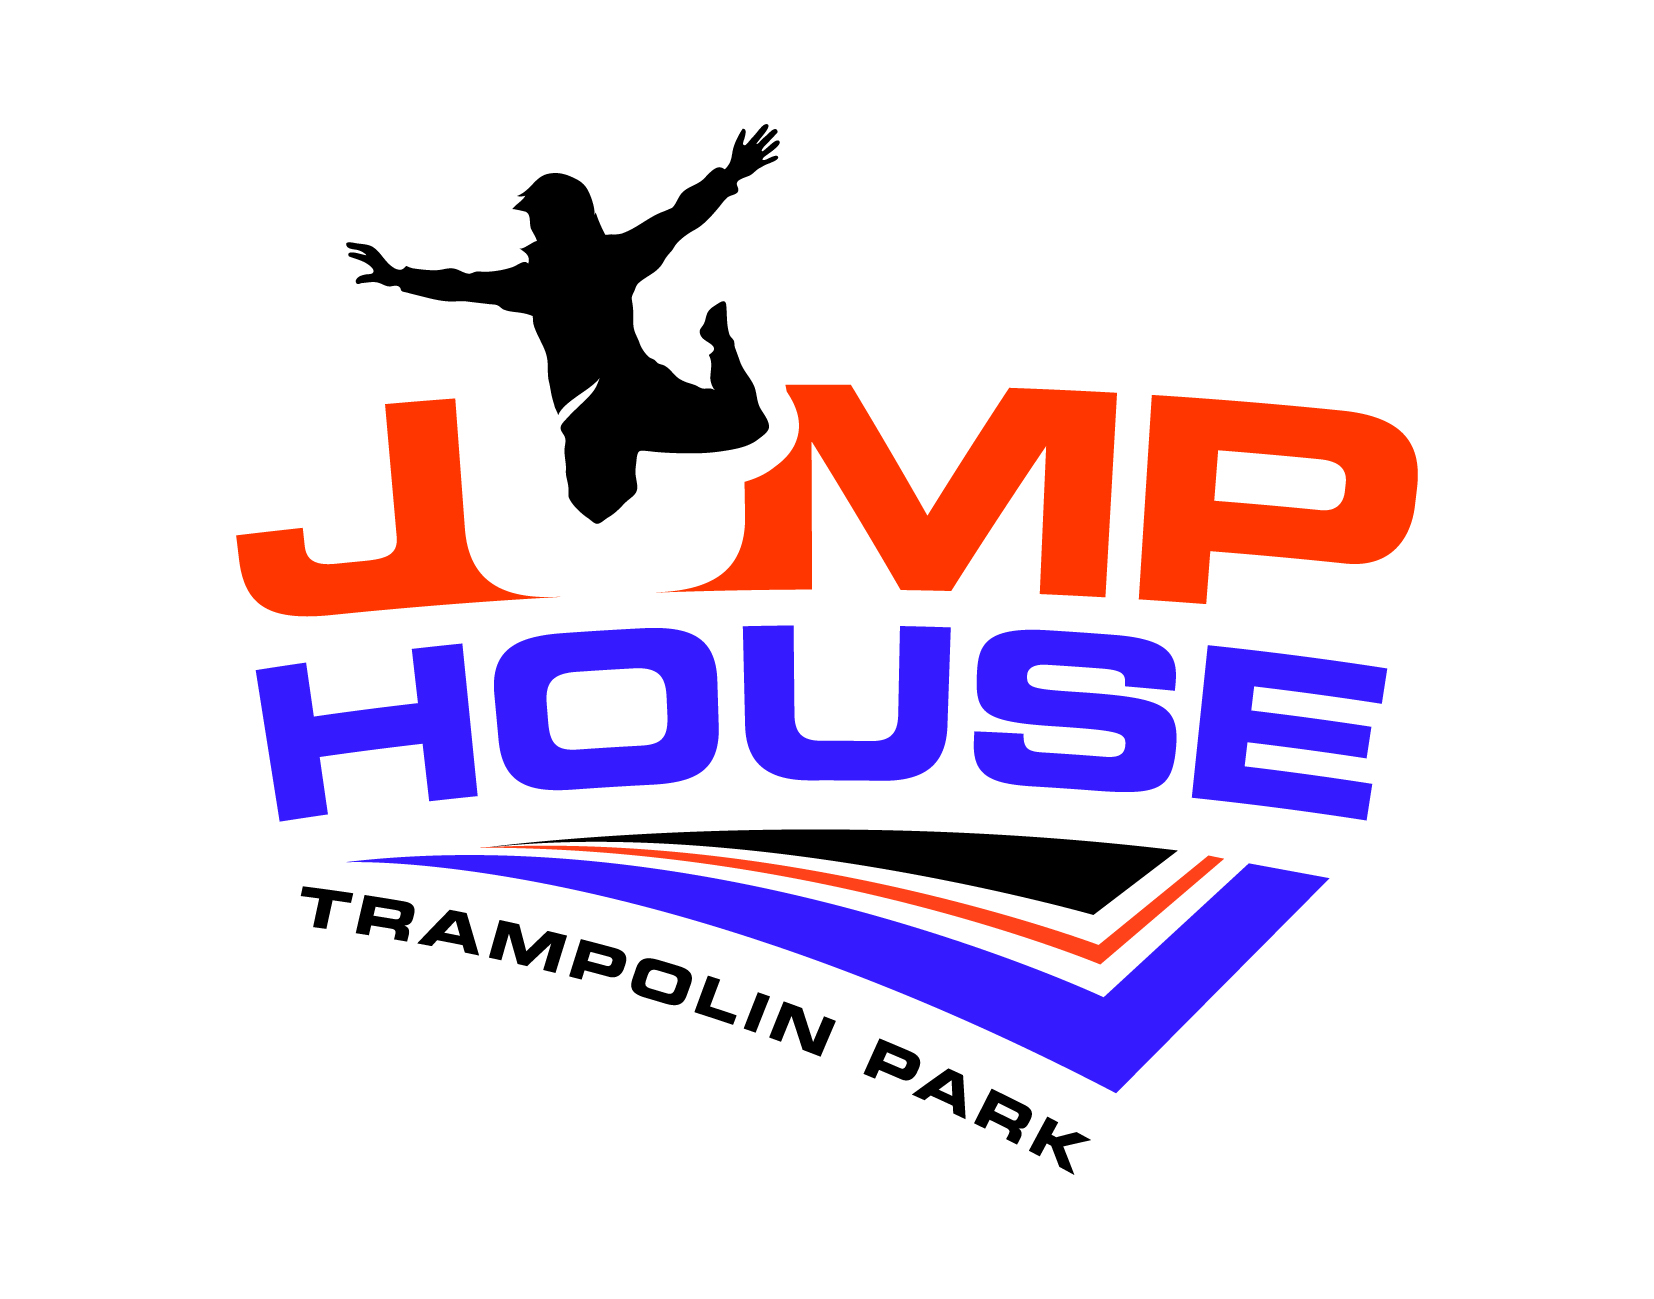 JUMP House Trampolinparks